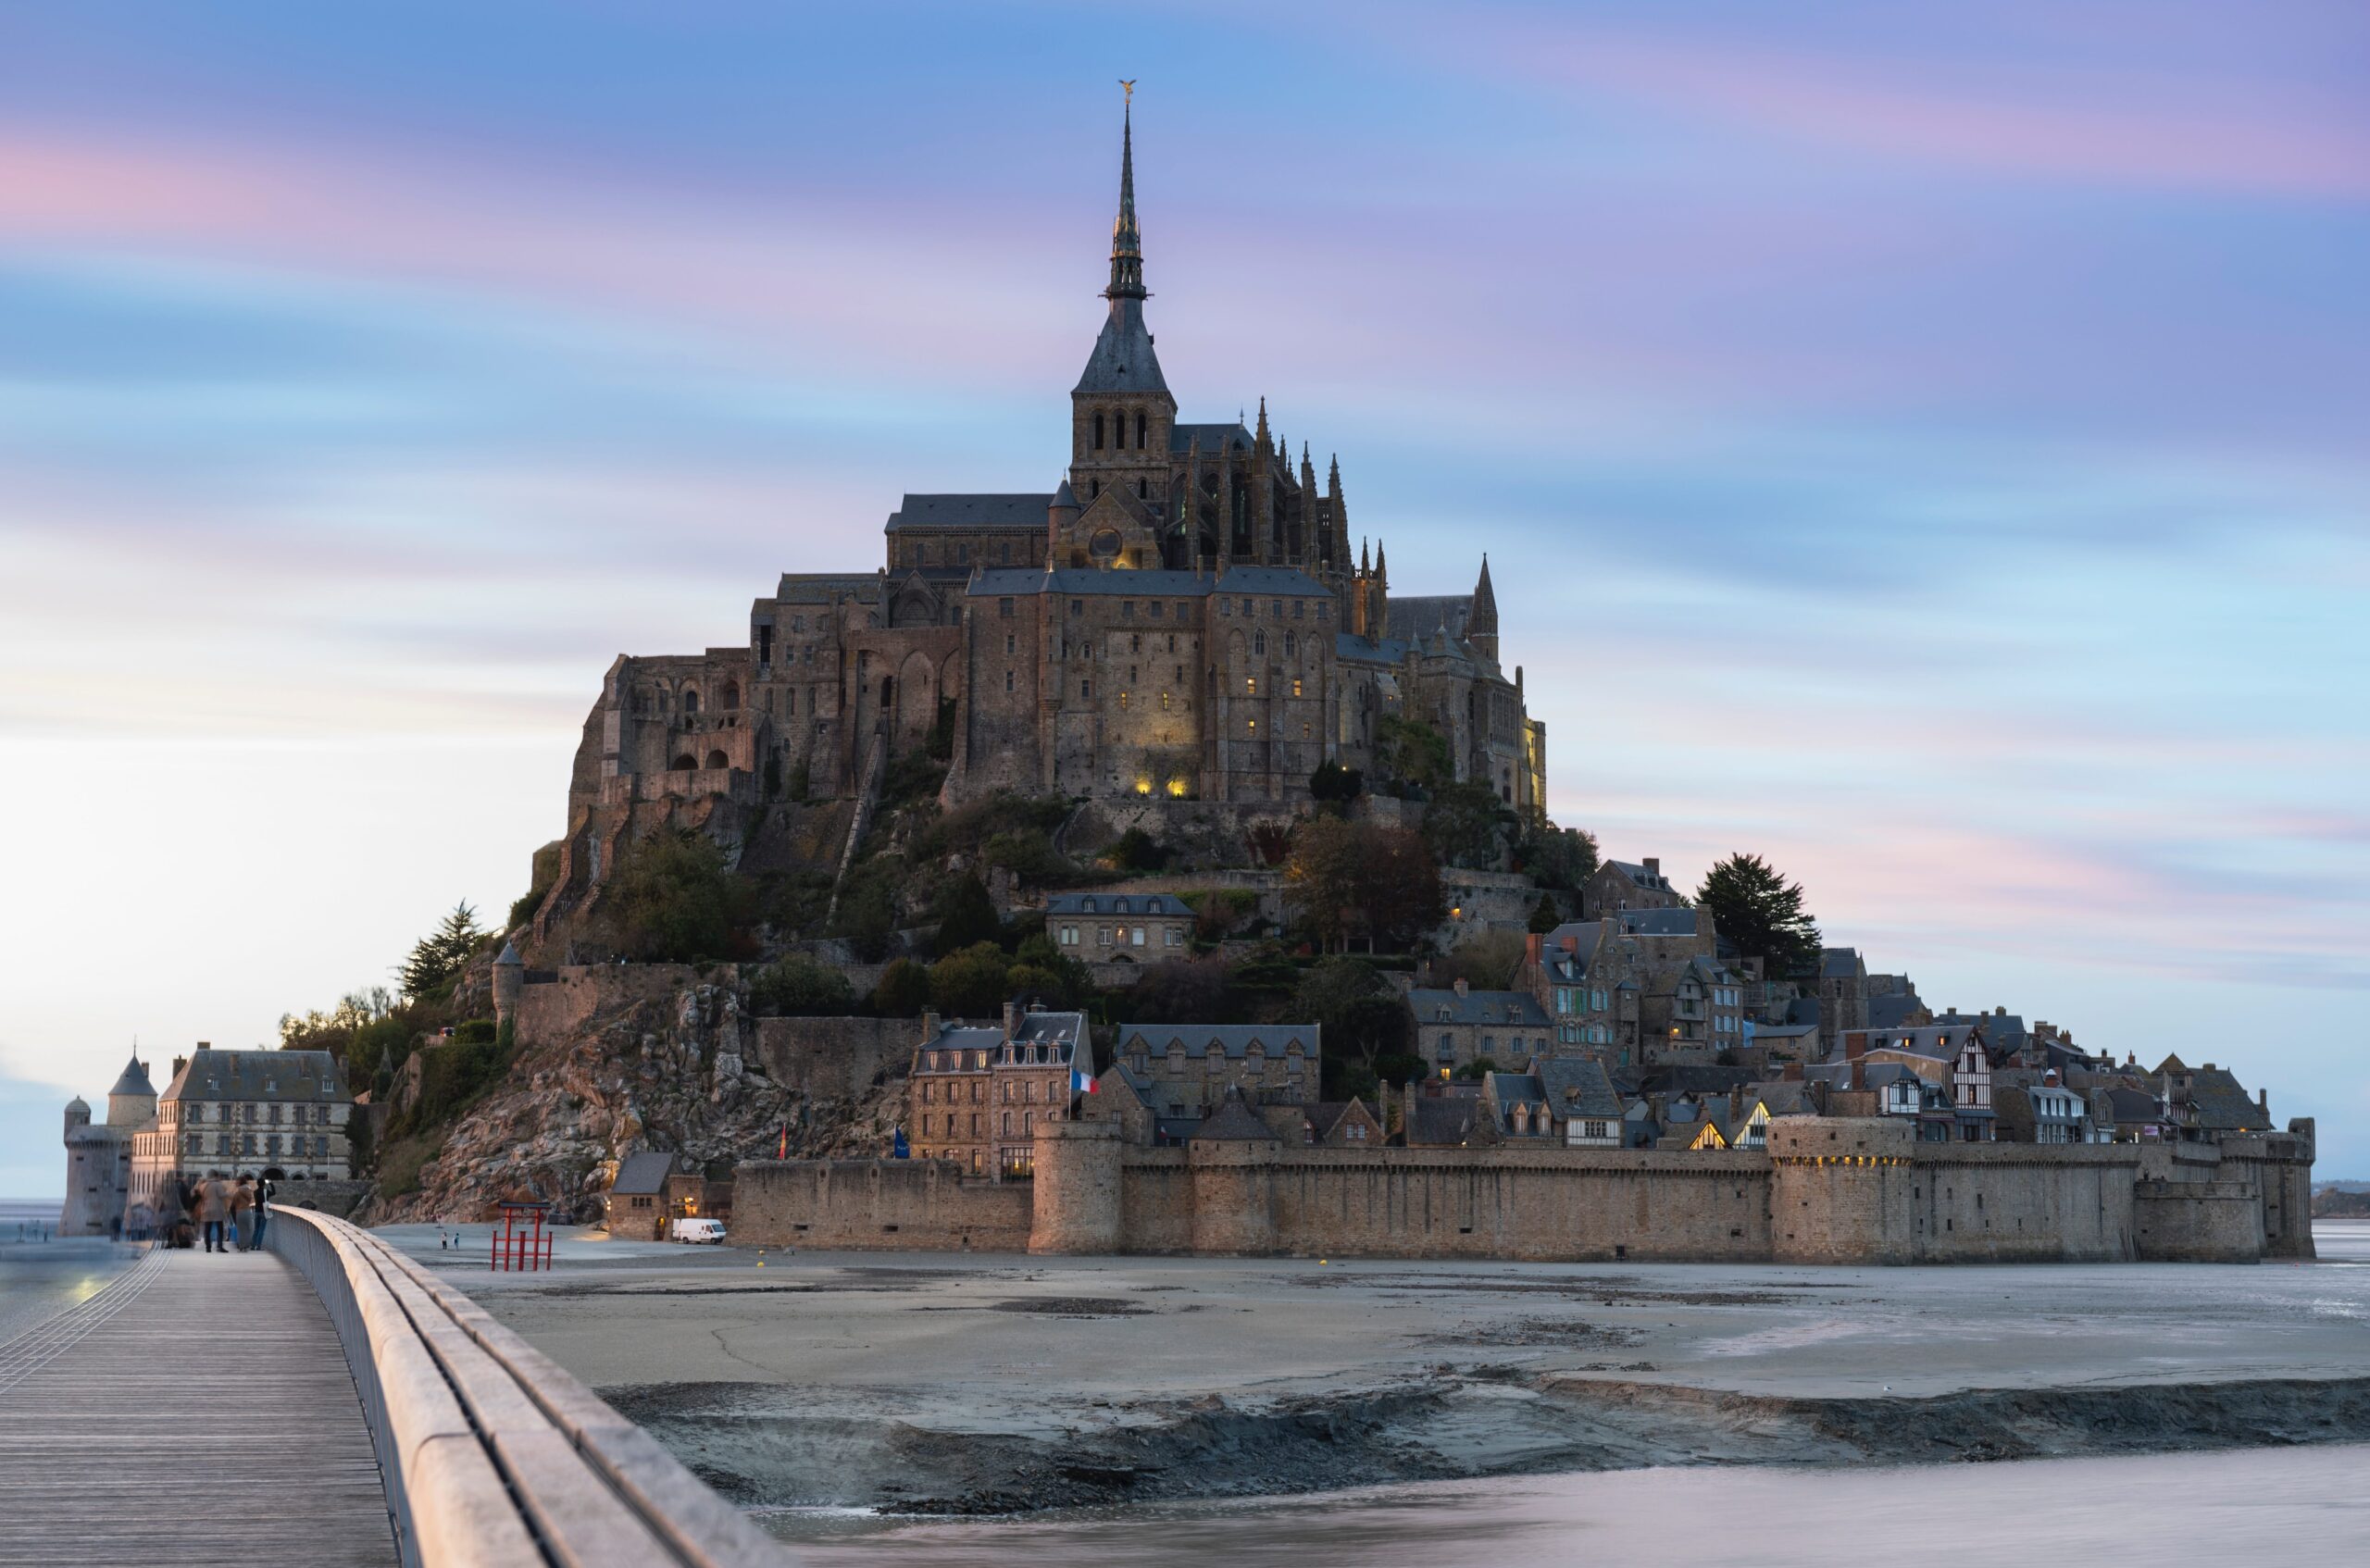 Some people call it - The Castle in The Water or Sea. Or the Floating Castle. But it is simply named Le Mont-Saint-Michel in France.